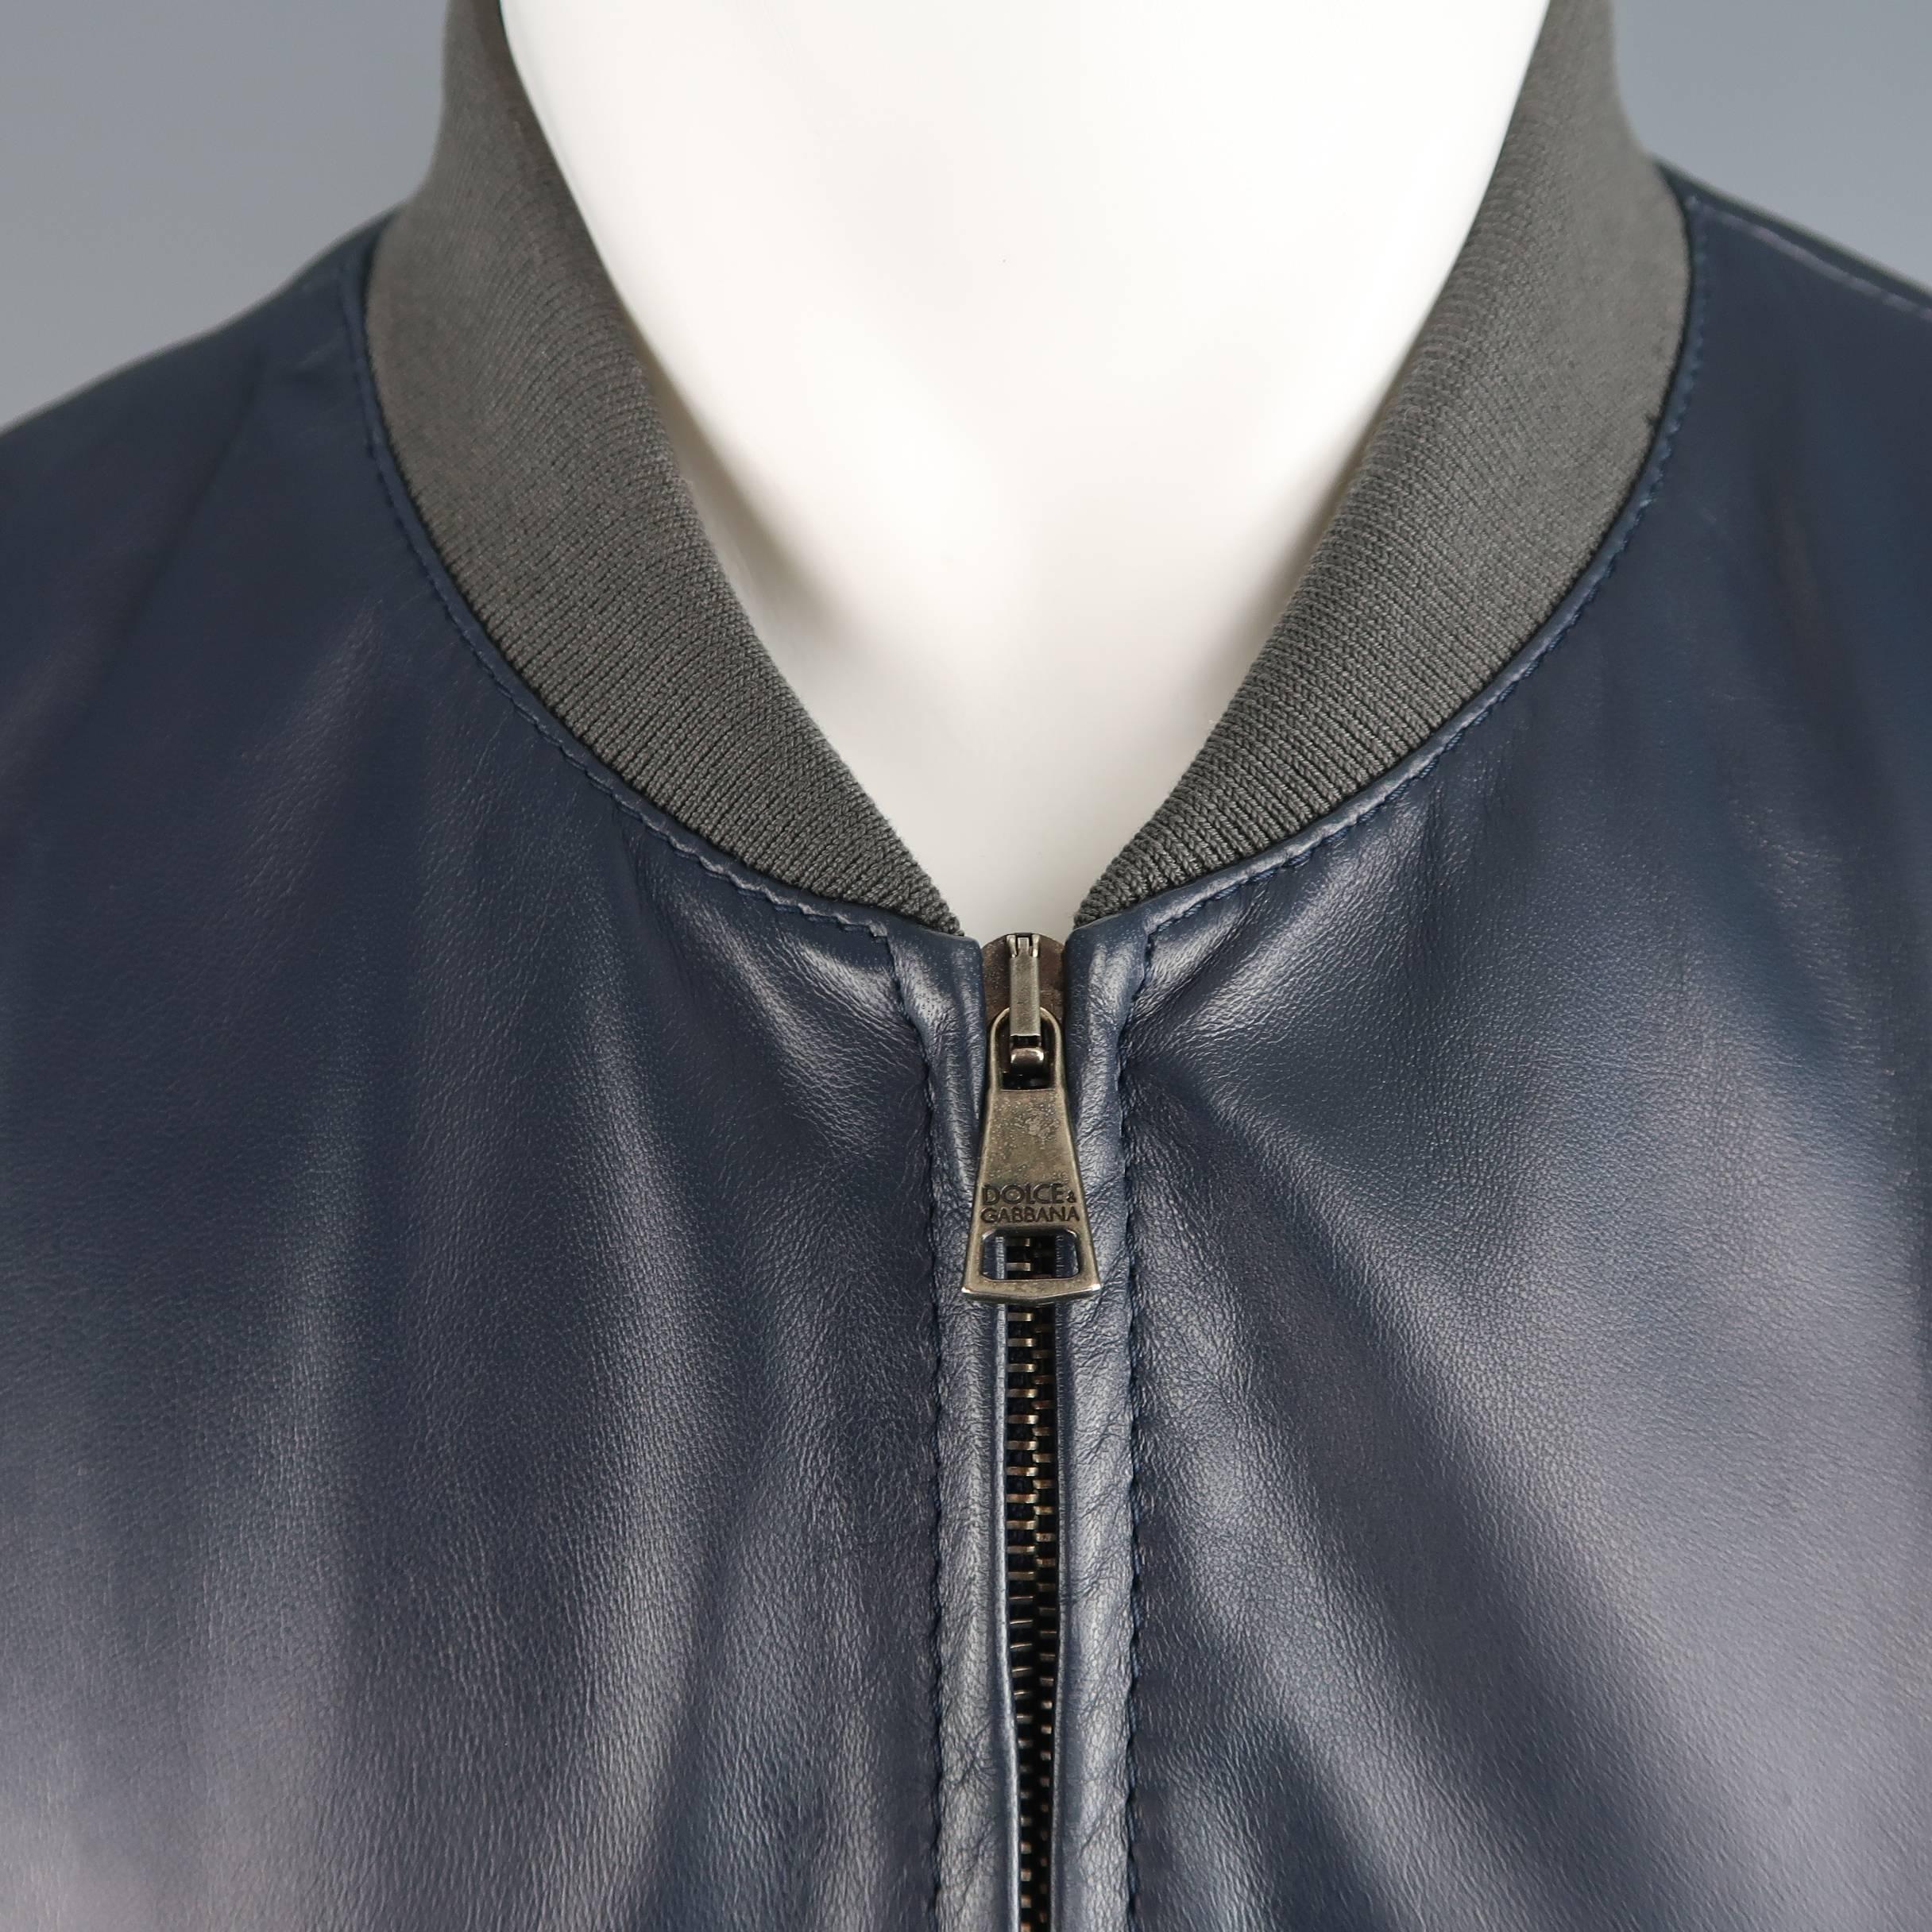 Tailored DOLCE & GABBANA bomber jacket comes in smooth navy blue leather with gray ribbed waistband, cuffs, and baseball collar and slanted snap pockets. Made in Italy.
 
Excellent Pre-Owned Condition.
Marked: IT 52
 
Measurements:
 
Shoulder: 18